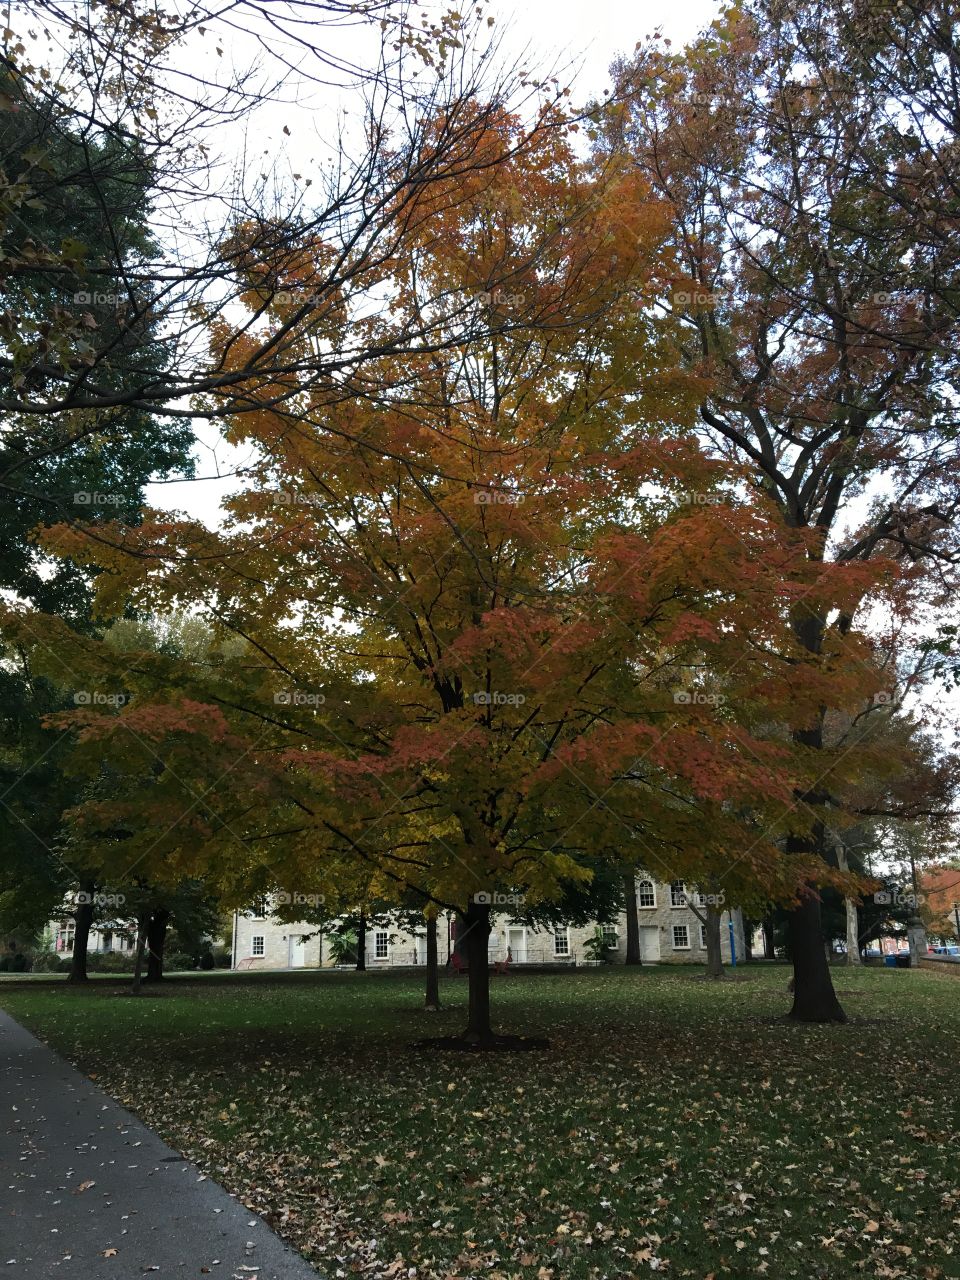 The beautiful academic quad at Dickinson College in the autumn